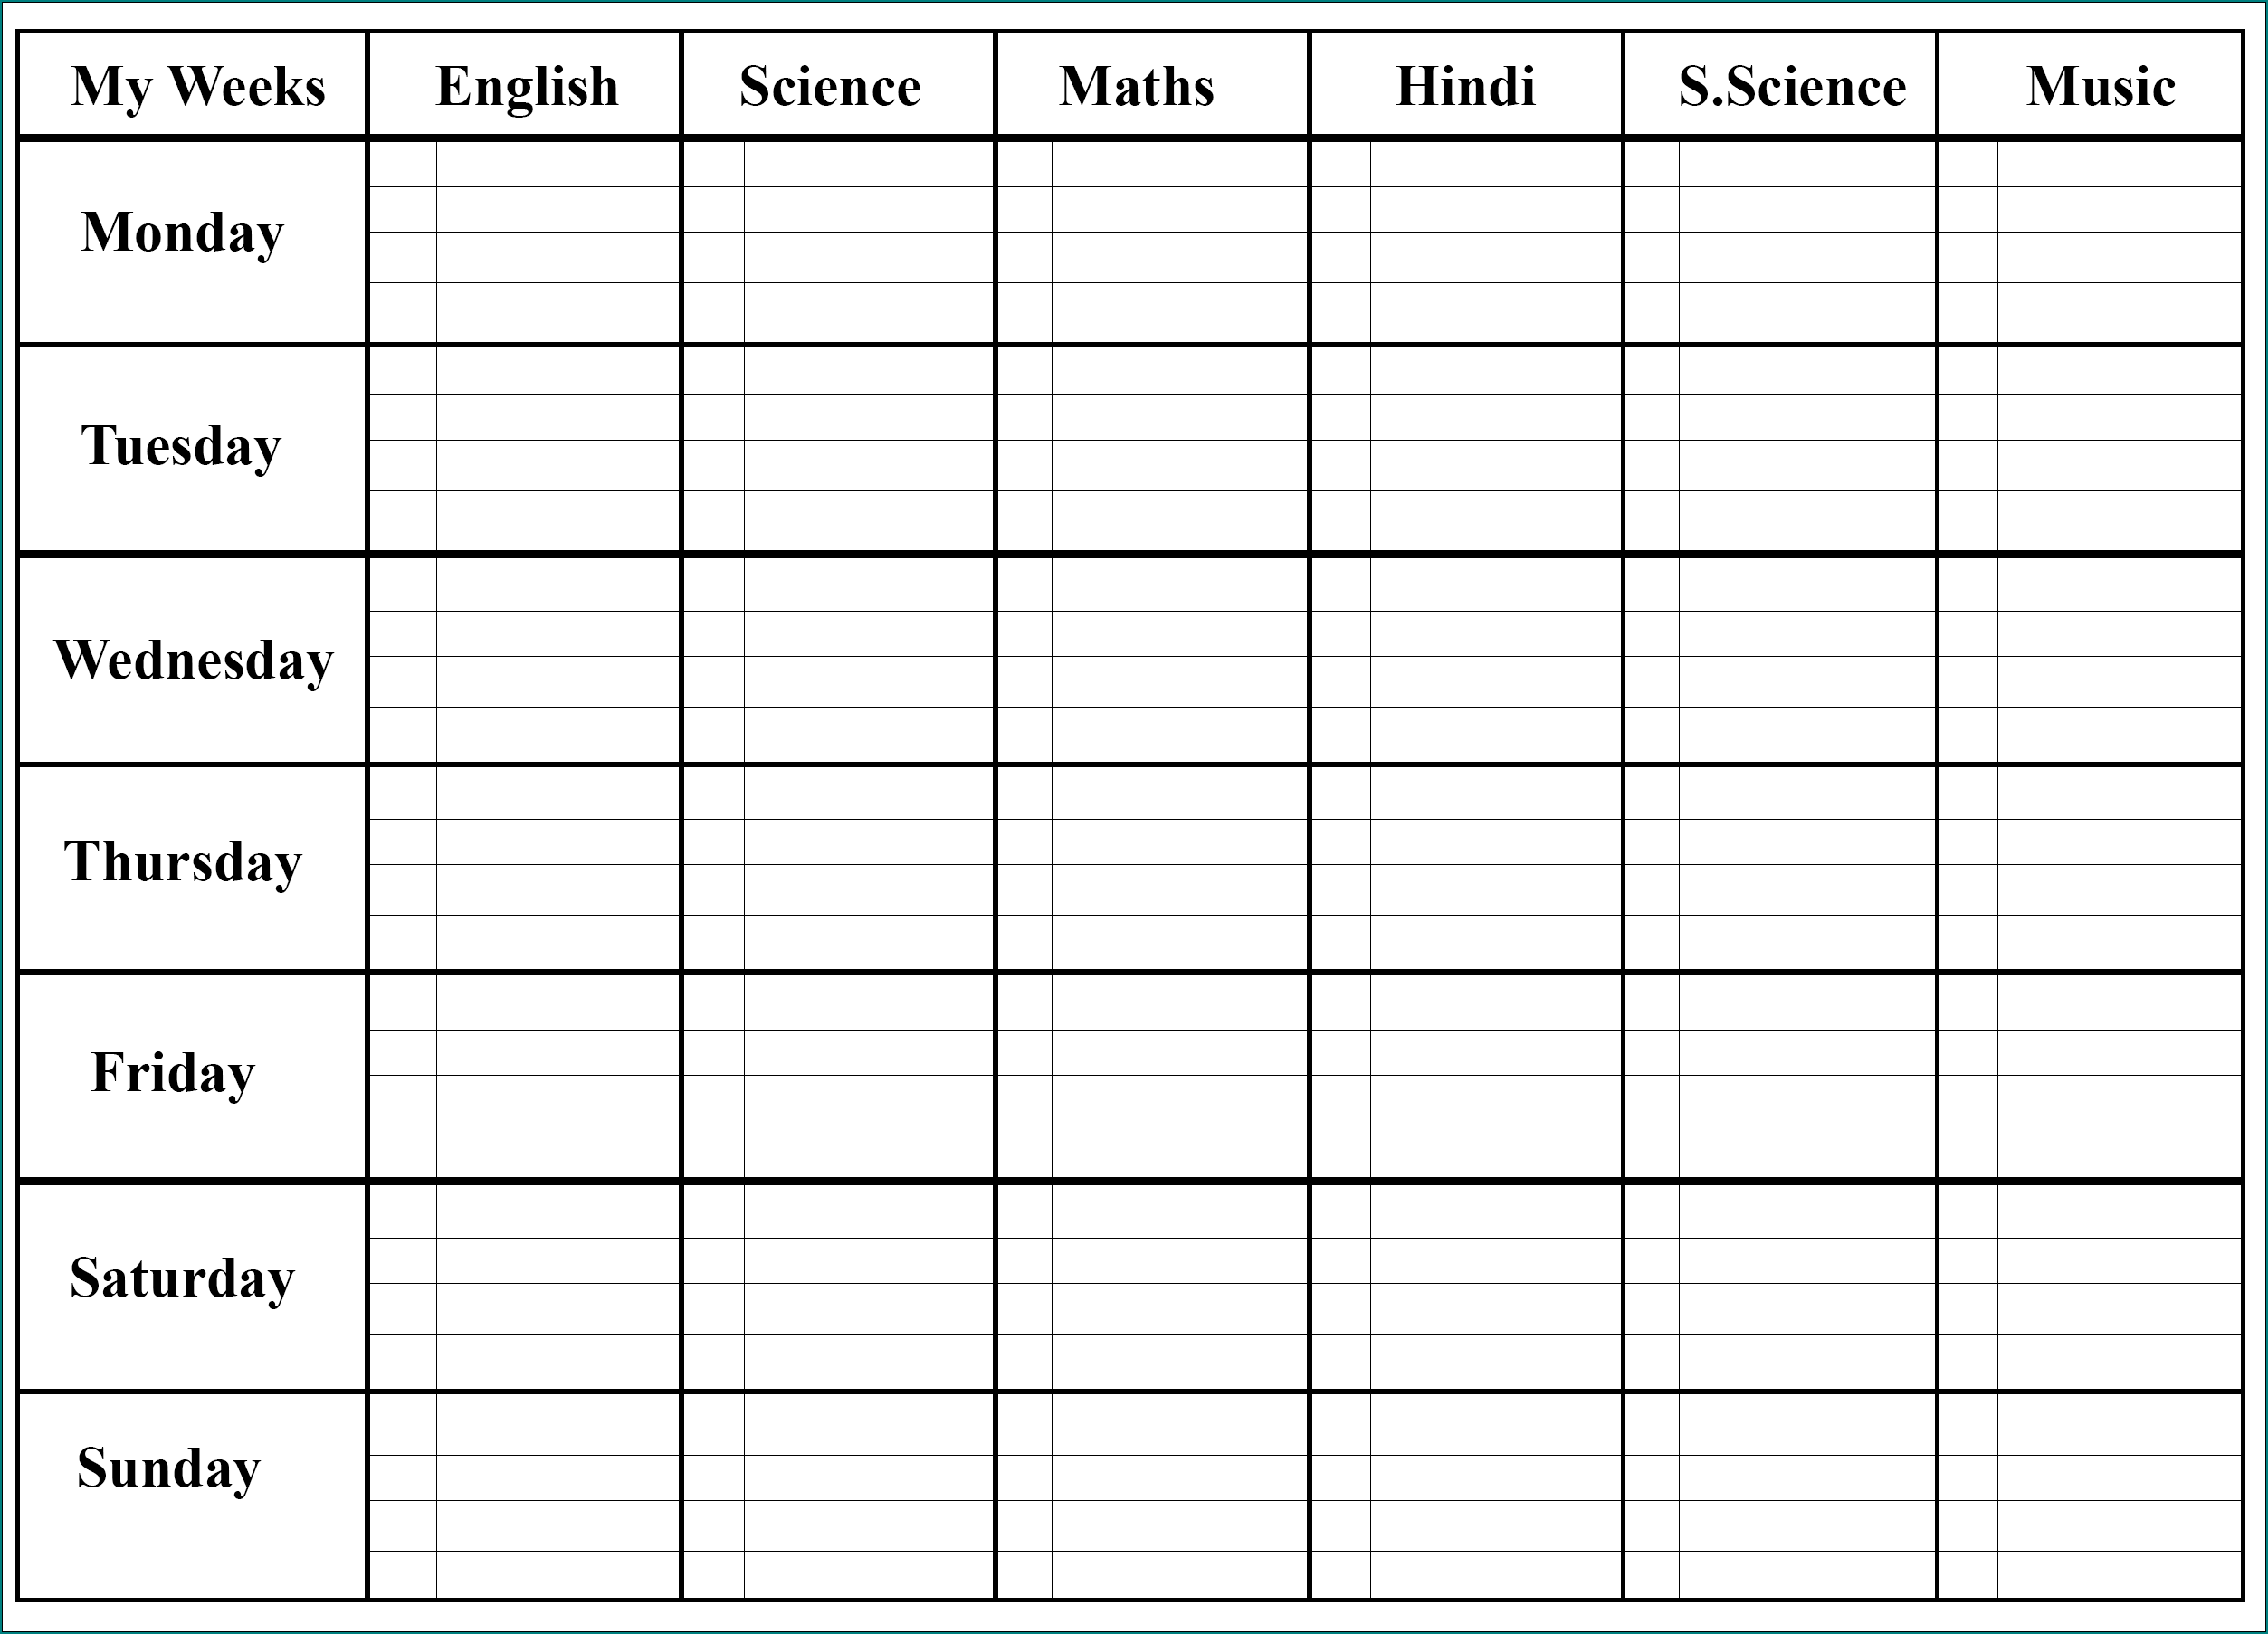 Sample of Weekly Class Schedule Template